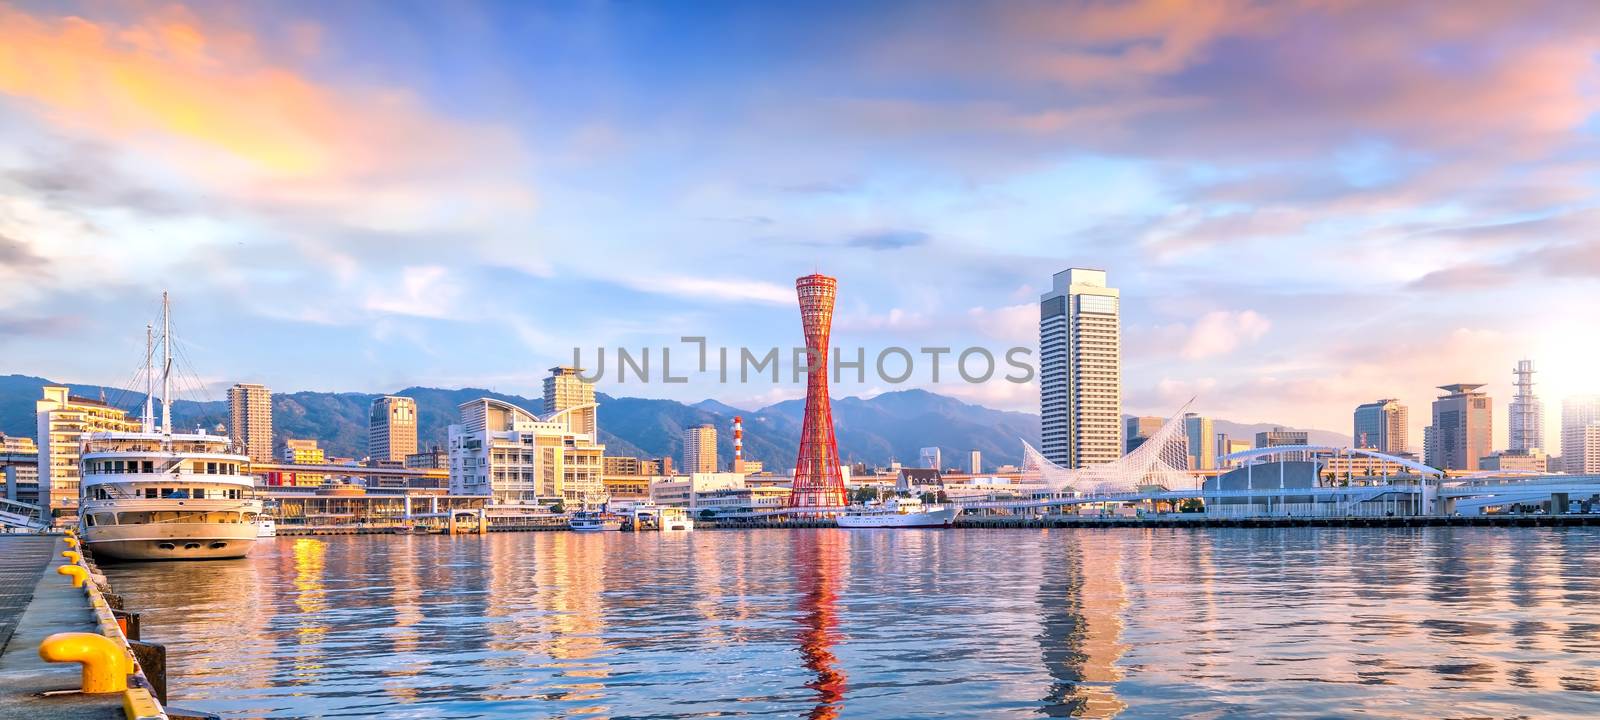 Skyline and Port of Kobe in Japan  by f11photo